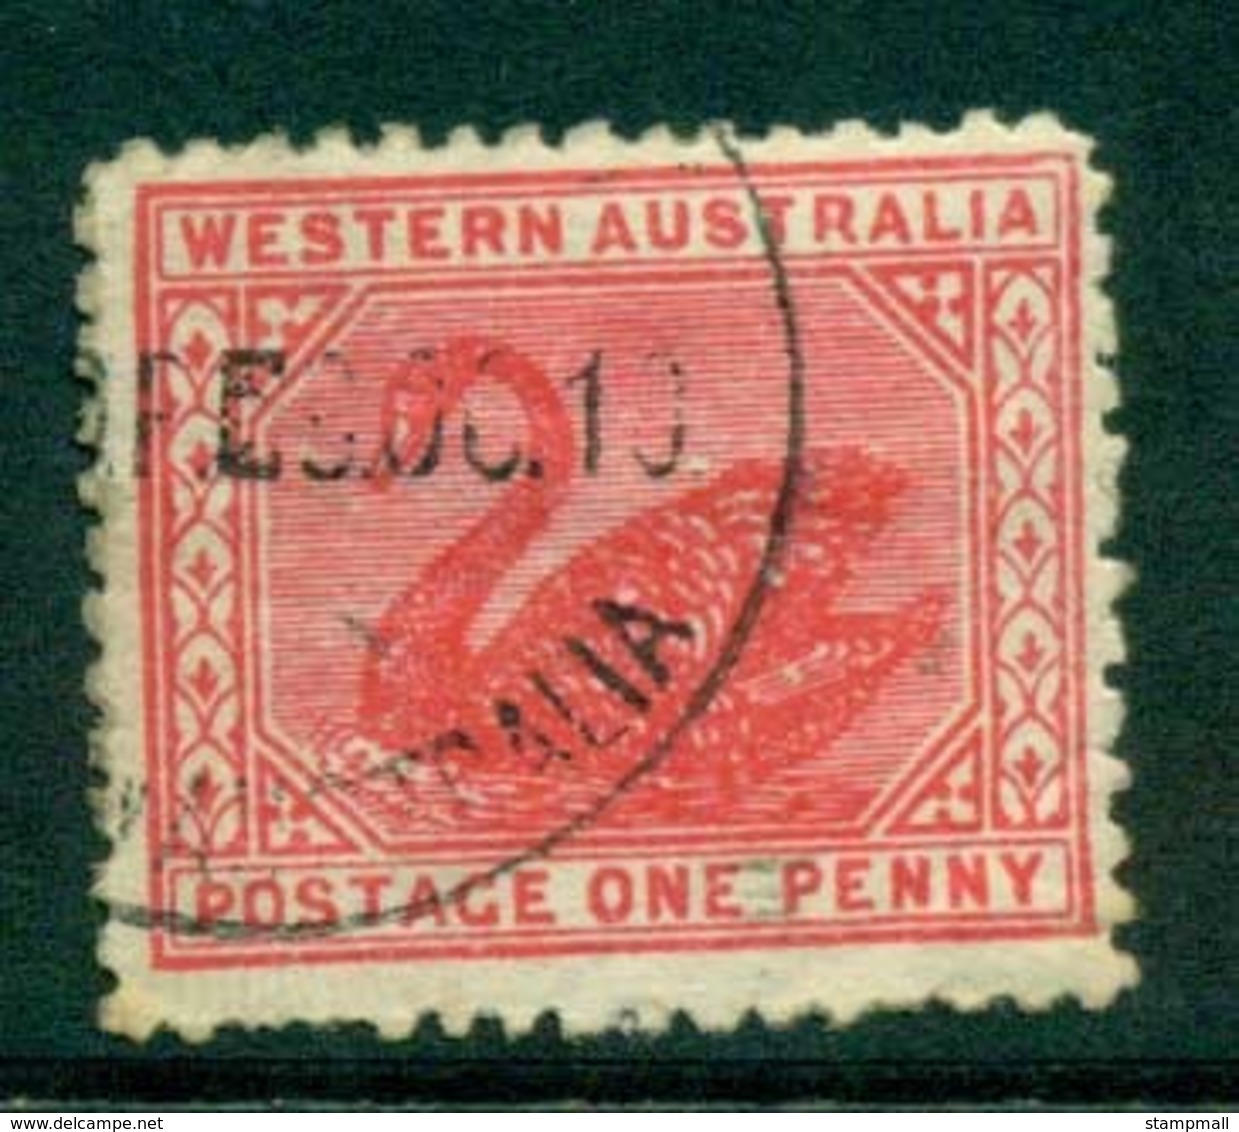 WA 1905-11 1d Red Swan Typo Perf 12.5 Wmk Crown A FU Lot28366 - Used Stamps